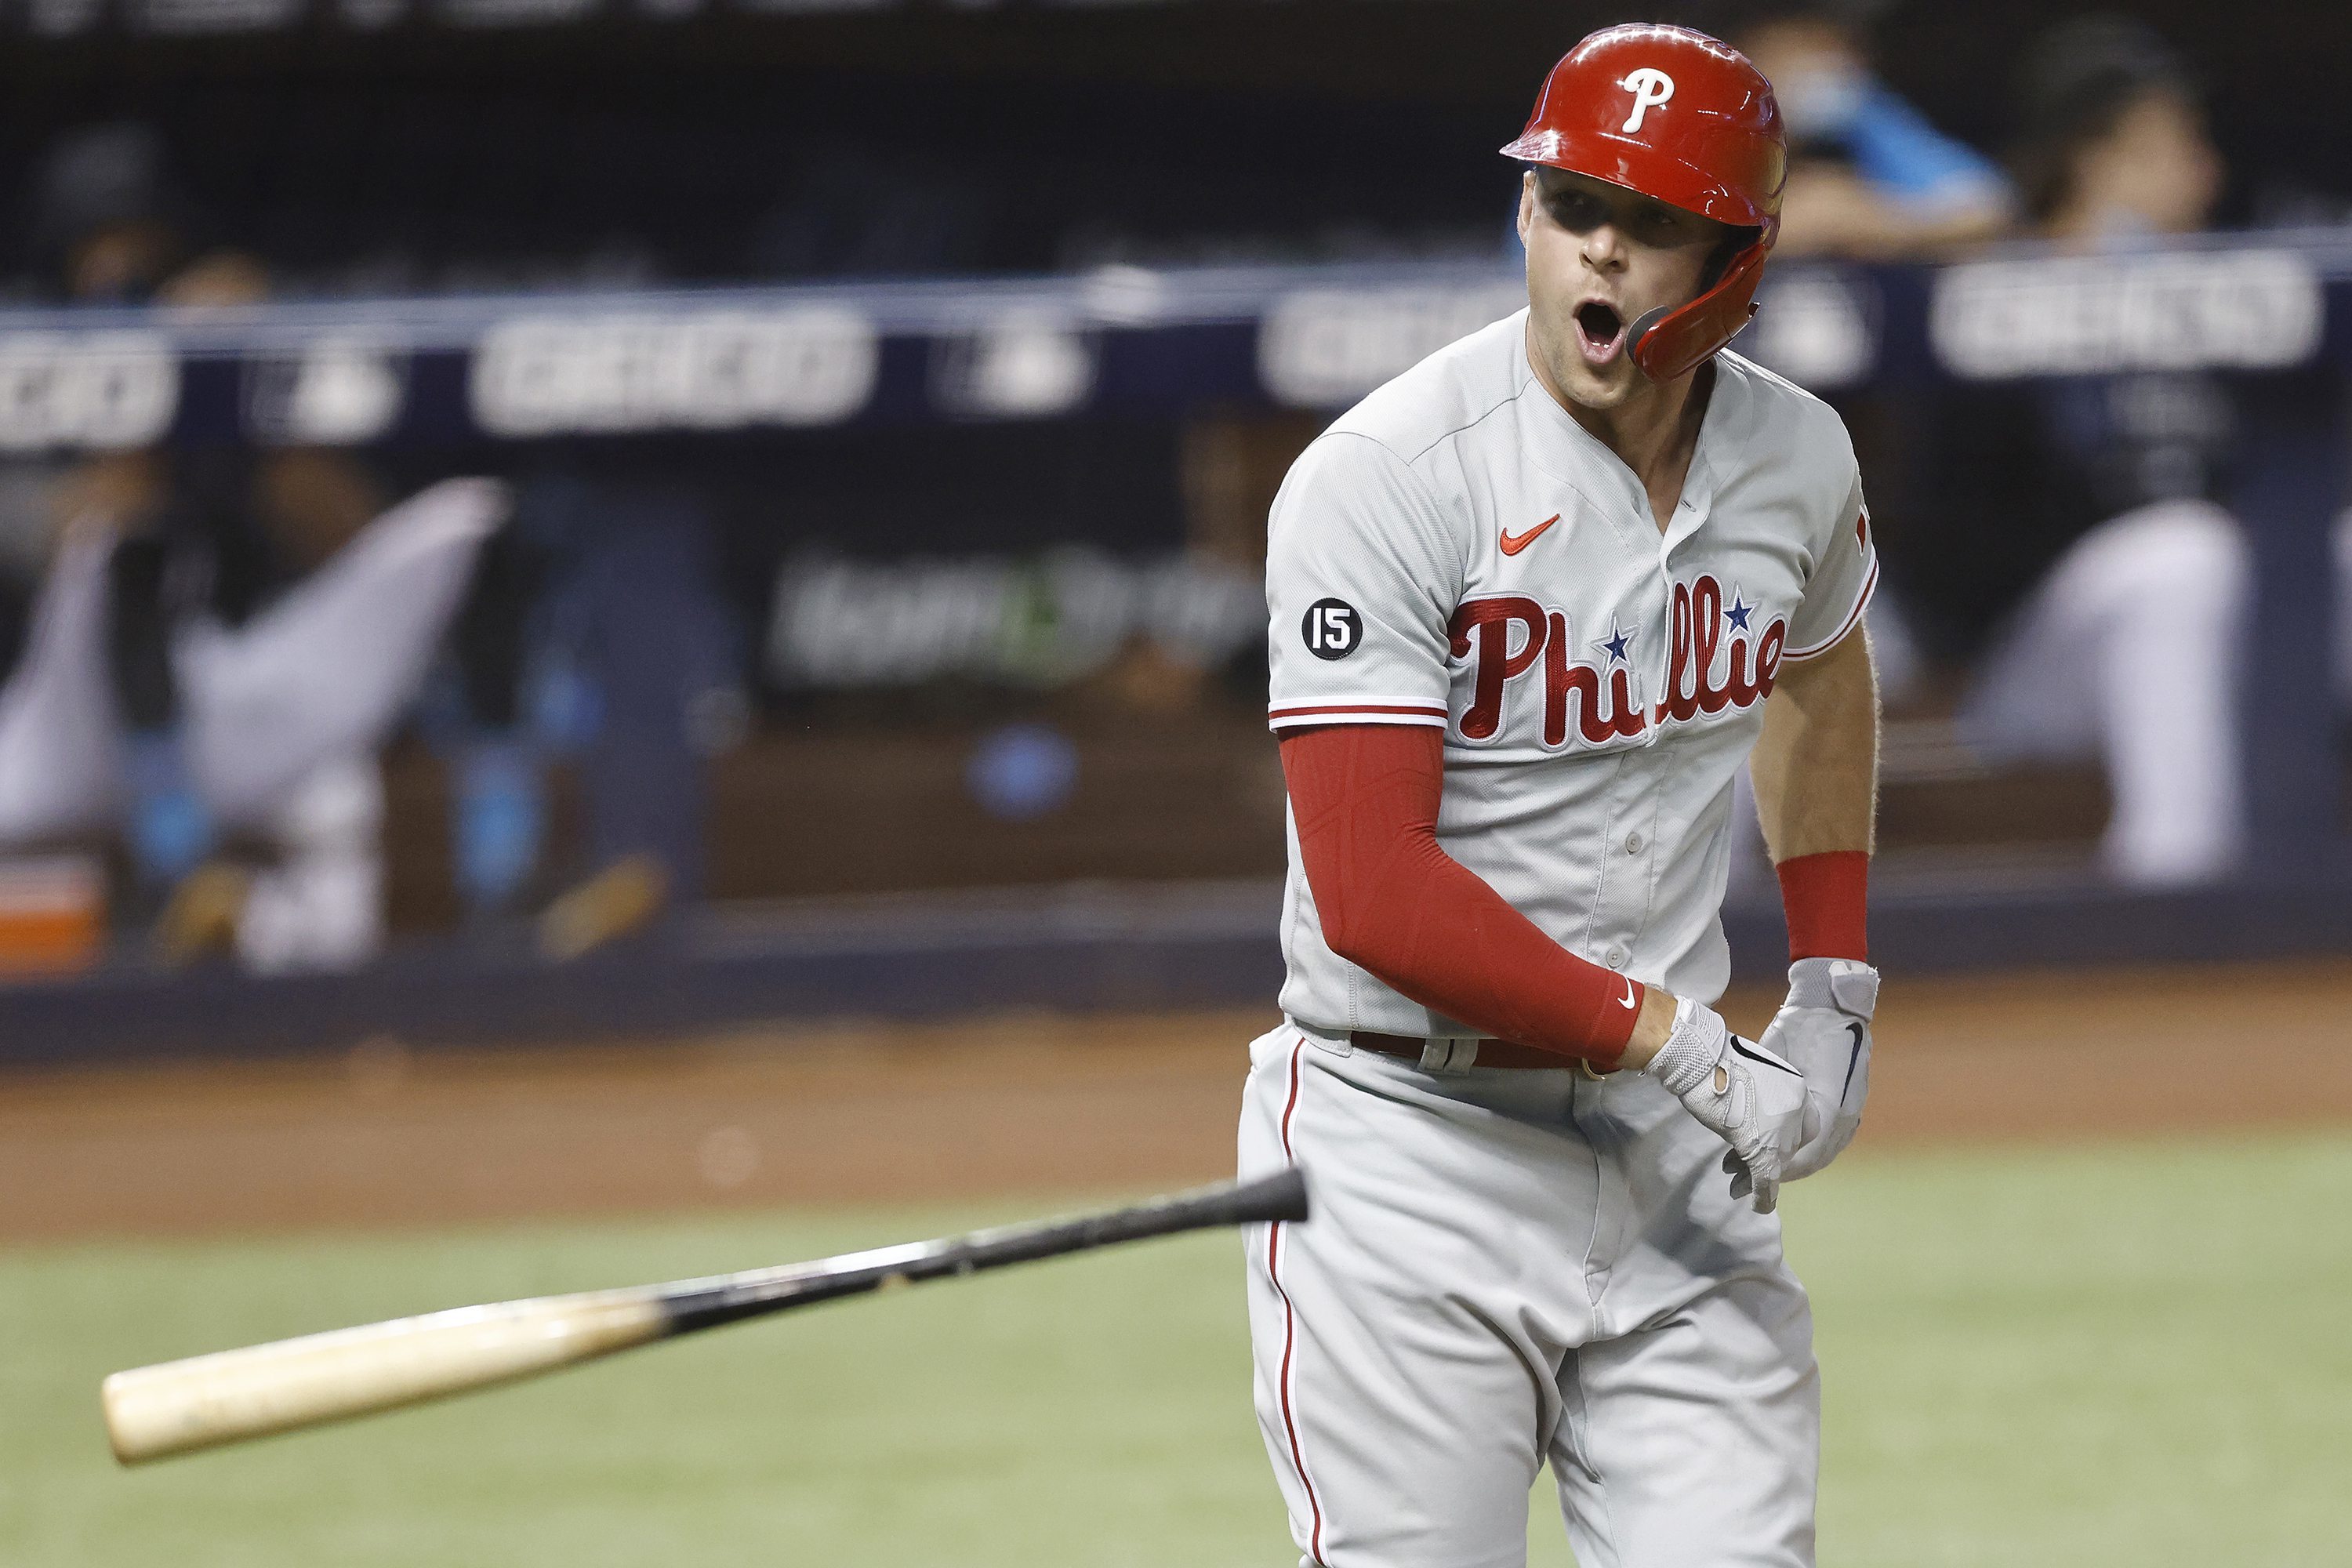 Rhys Hoskins' two-run homer provided all the scoring the Phillies needed.